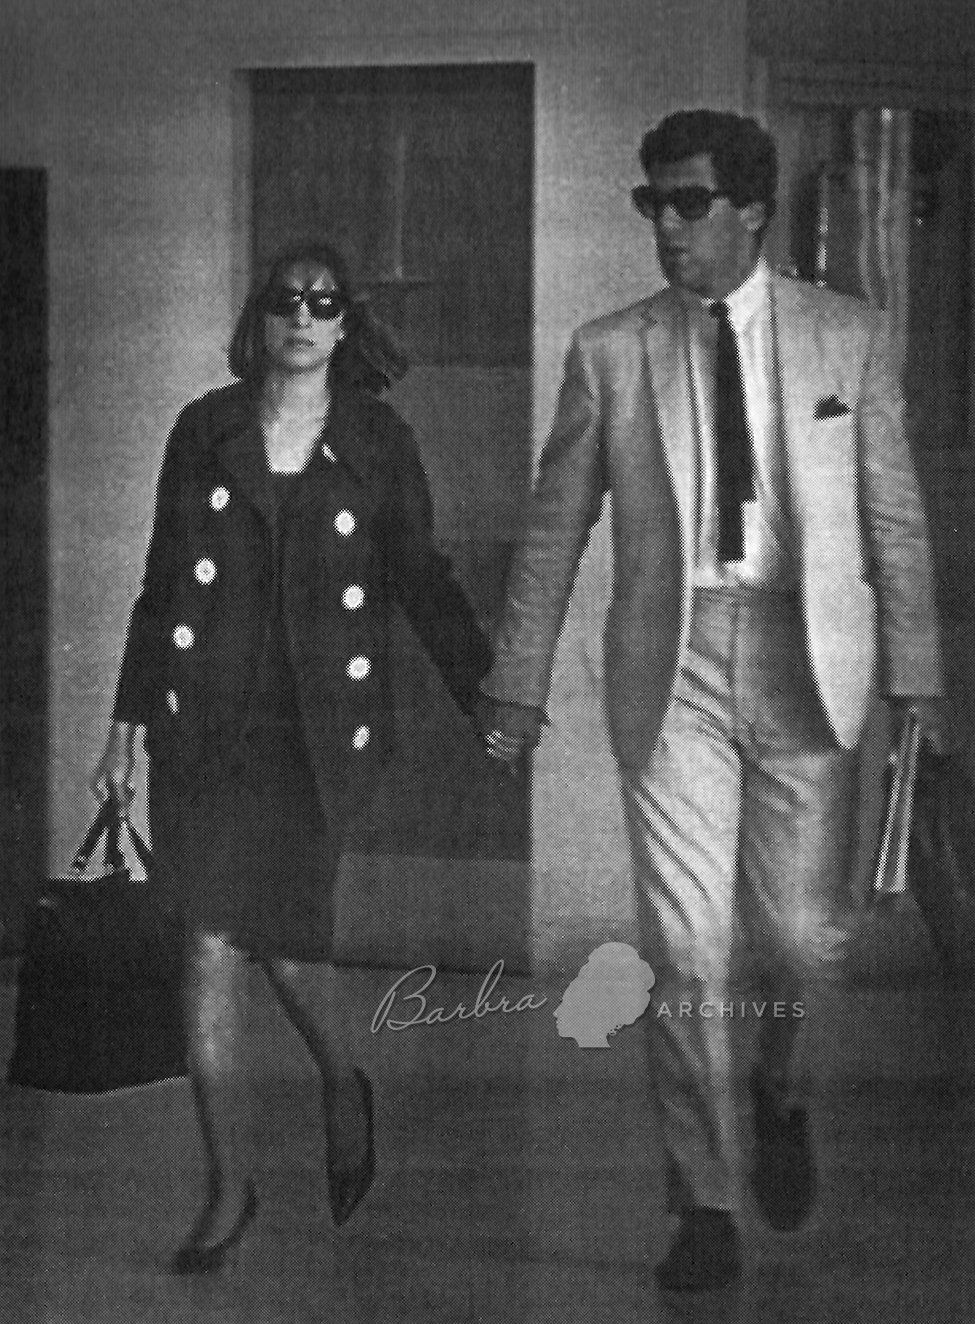 Barbra Streisand and Elliott Gould snapped by a photographer at the Miami airport